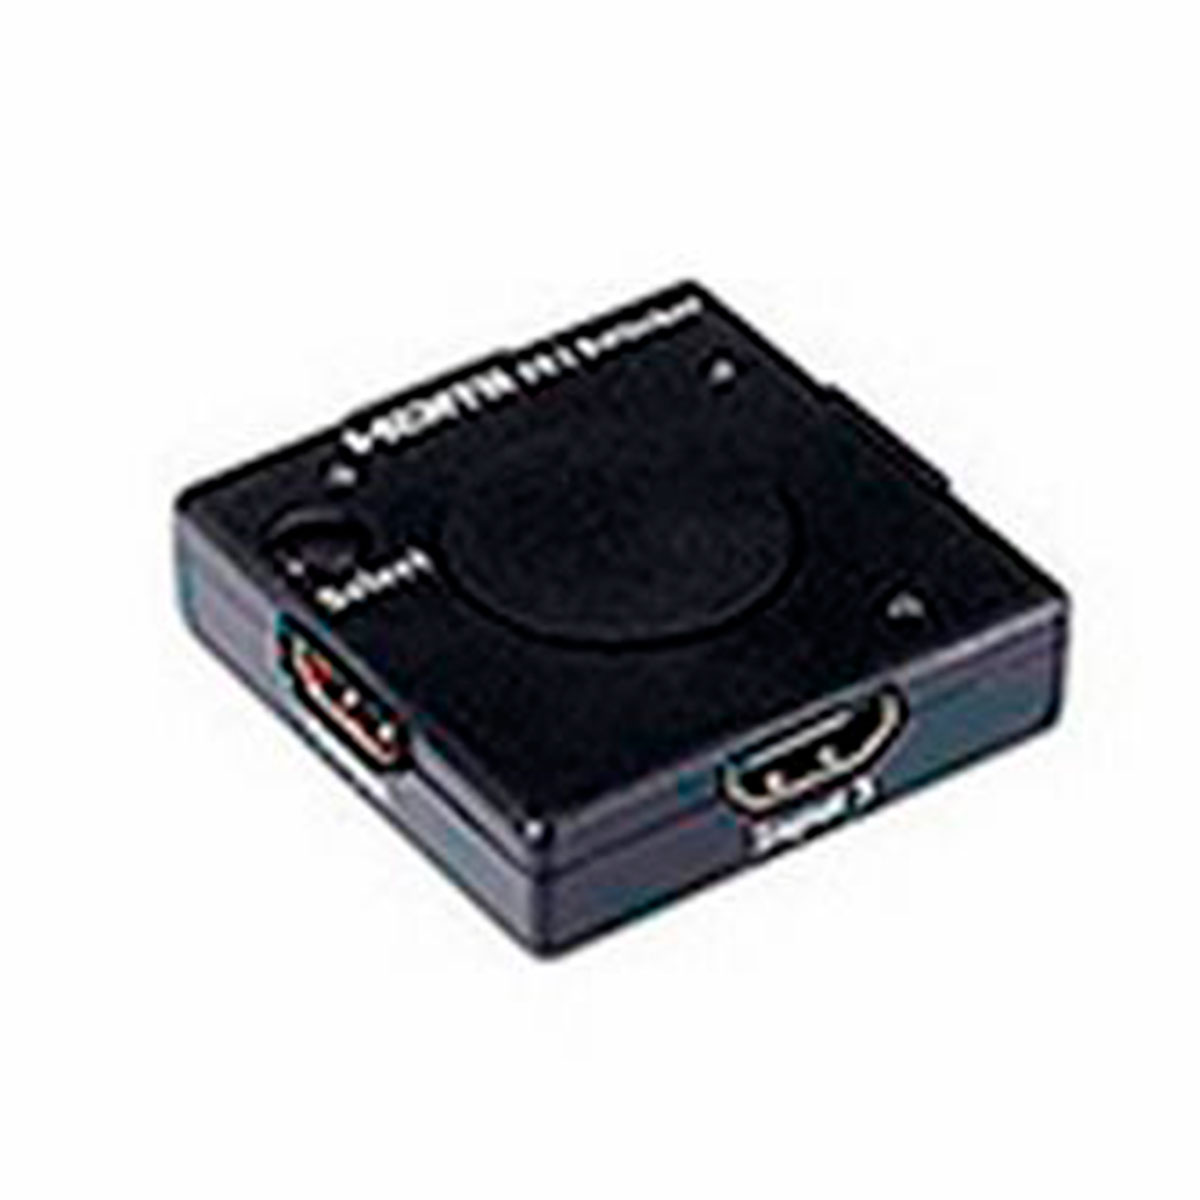 4420 INT.CO                                                       | SWITCH HDMI 3 CONTROL SW-2203                                                                                                                                                                                                                   